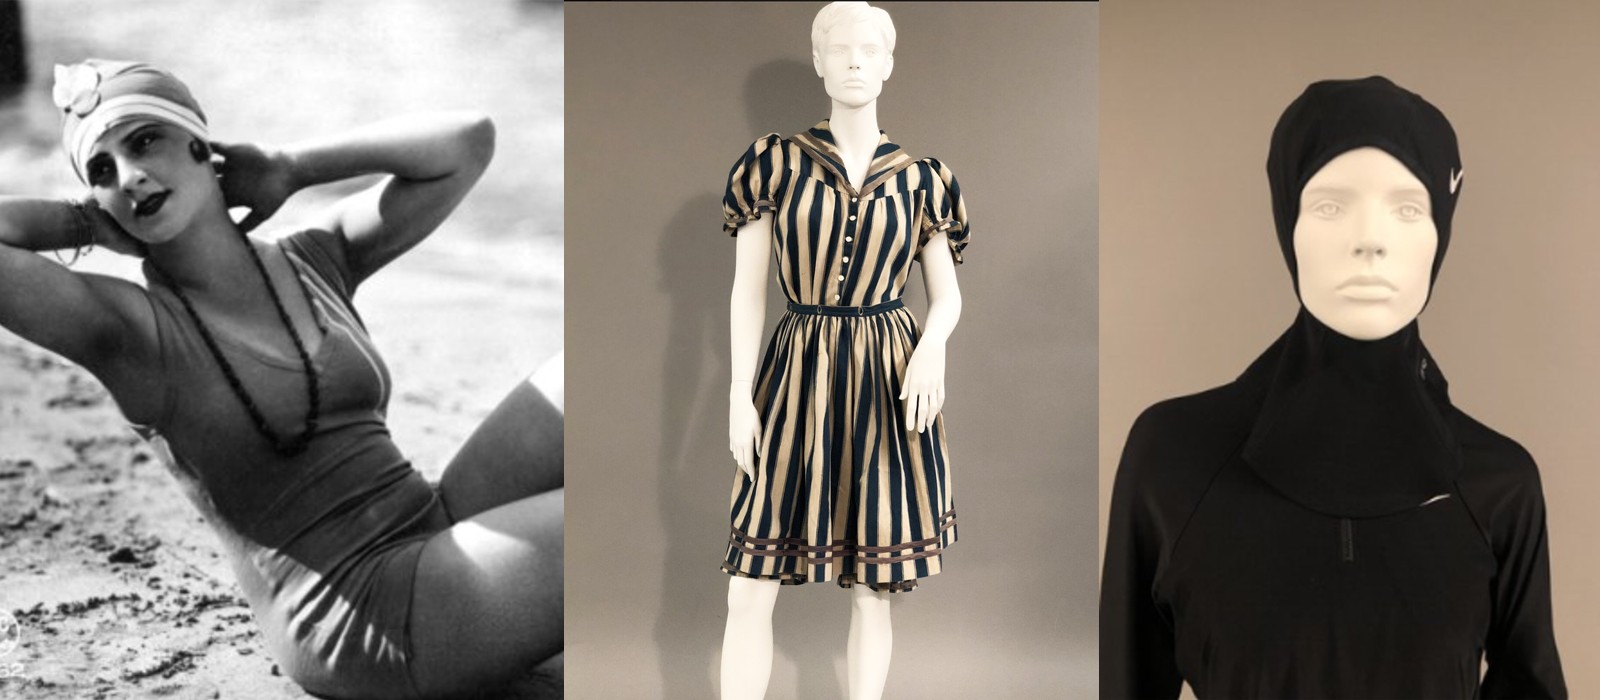 Images from The Legacies of American Swimwear exhibition